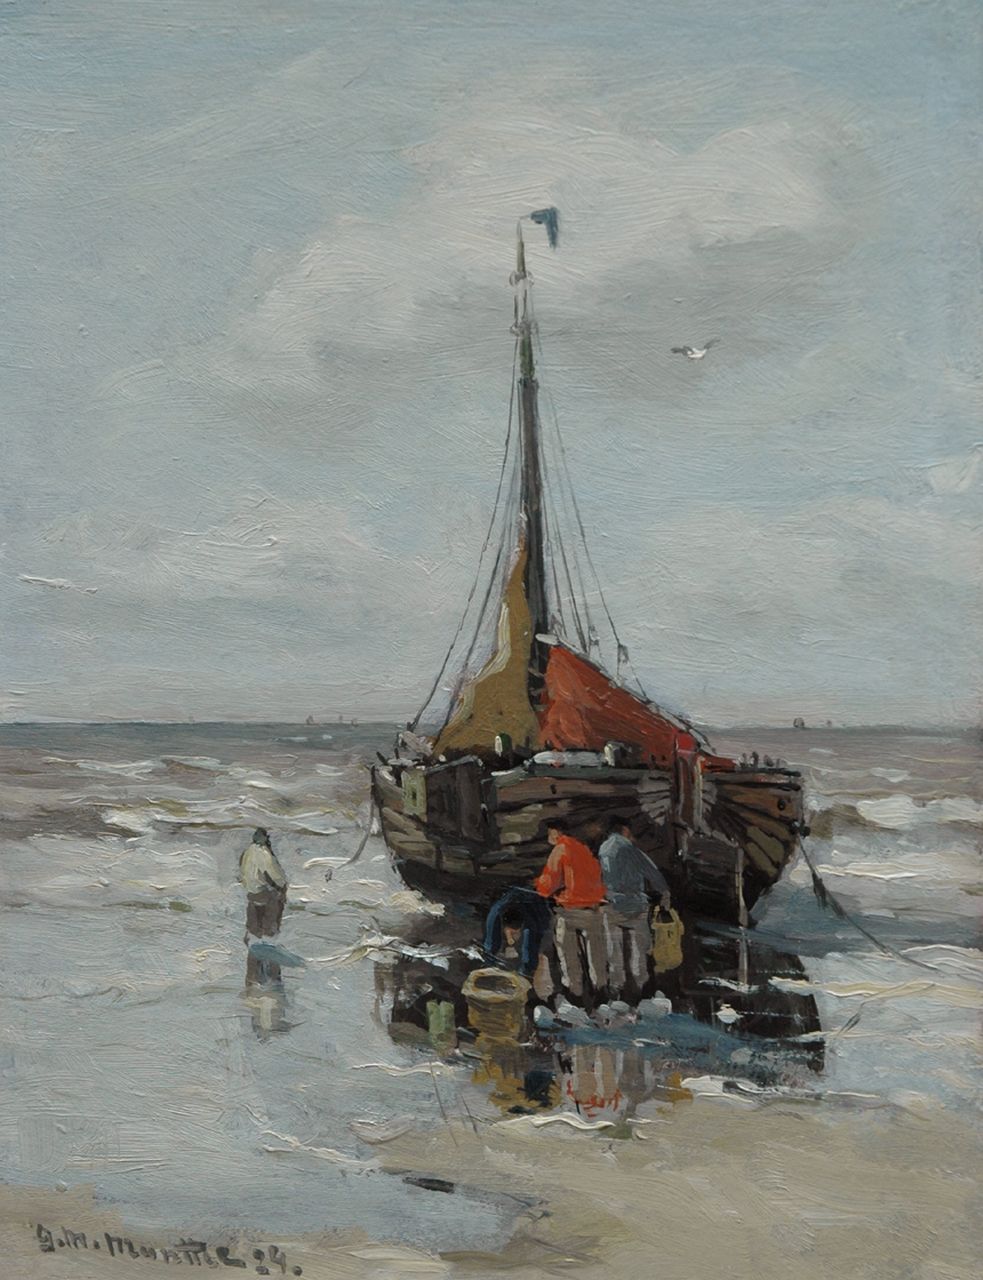 Munthe G.A.L.  | Gerhard Arij Ludwig 'Morgenstjerne' Munthe, Unloading the catch, oil on painter's board 25.9 x 19.9 cm, signed l.l. and dated '24